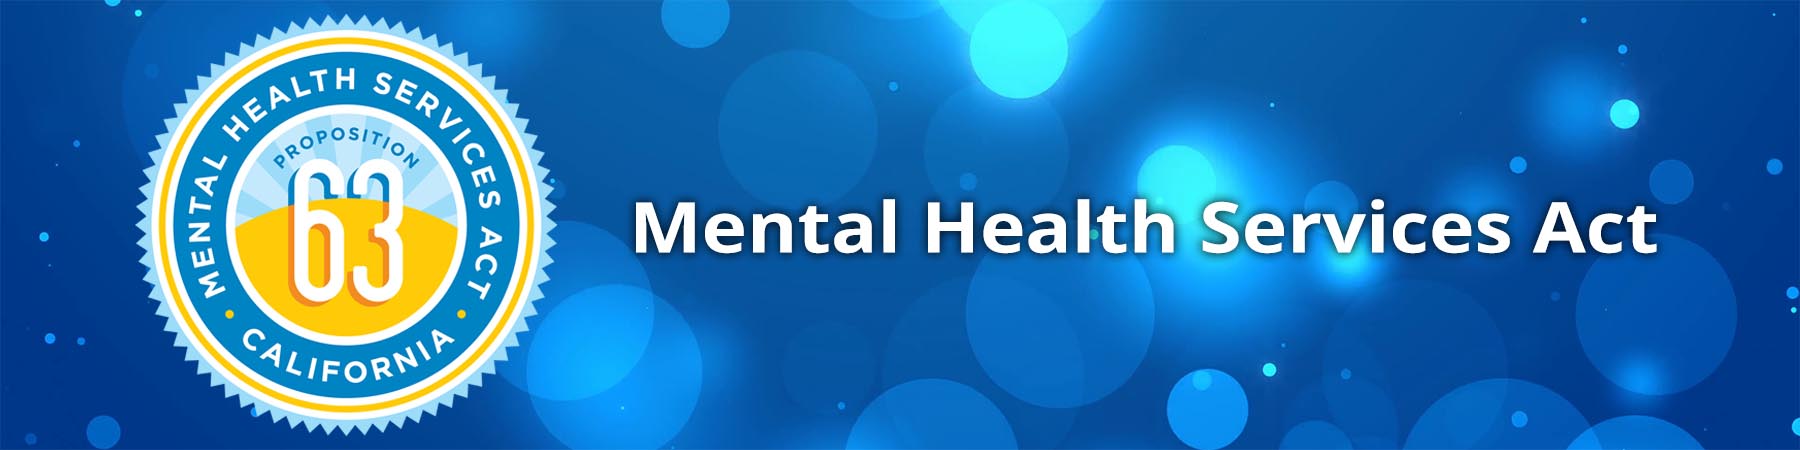 mental health services 10 25